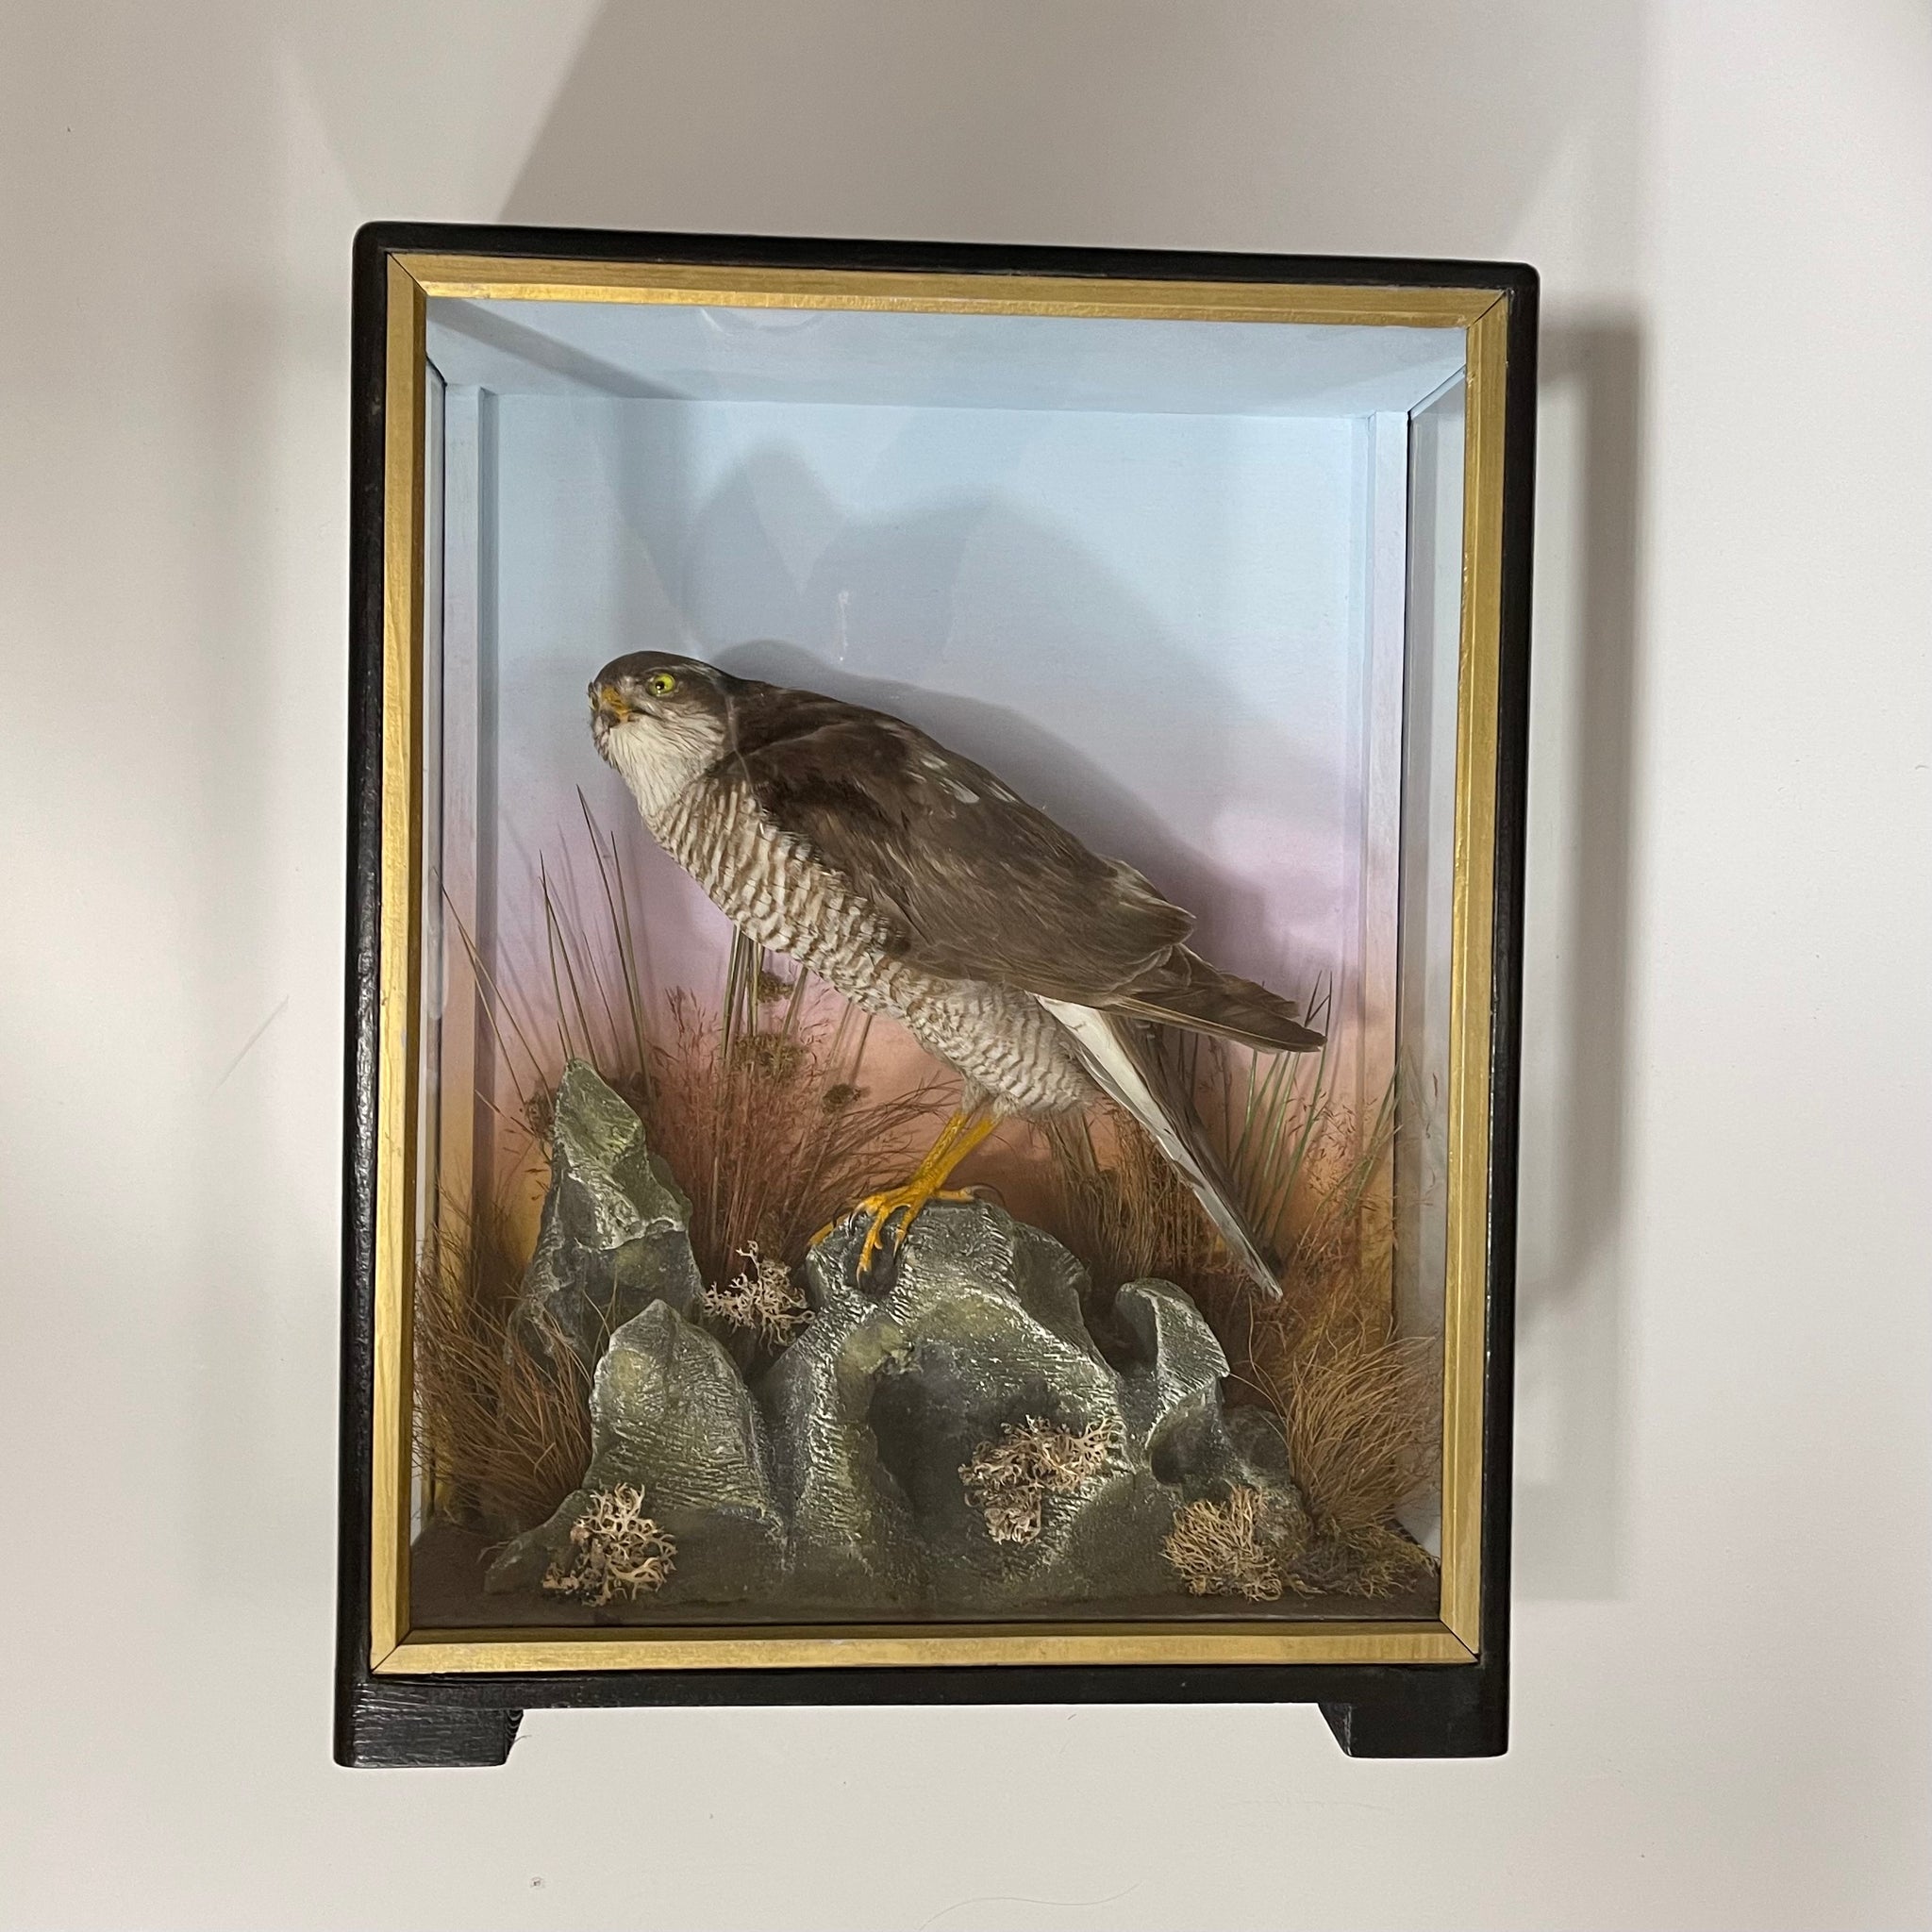 Taxidermy Hutchings Antique Specimen Of A Sparrowhawk